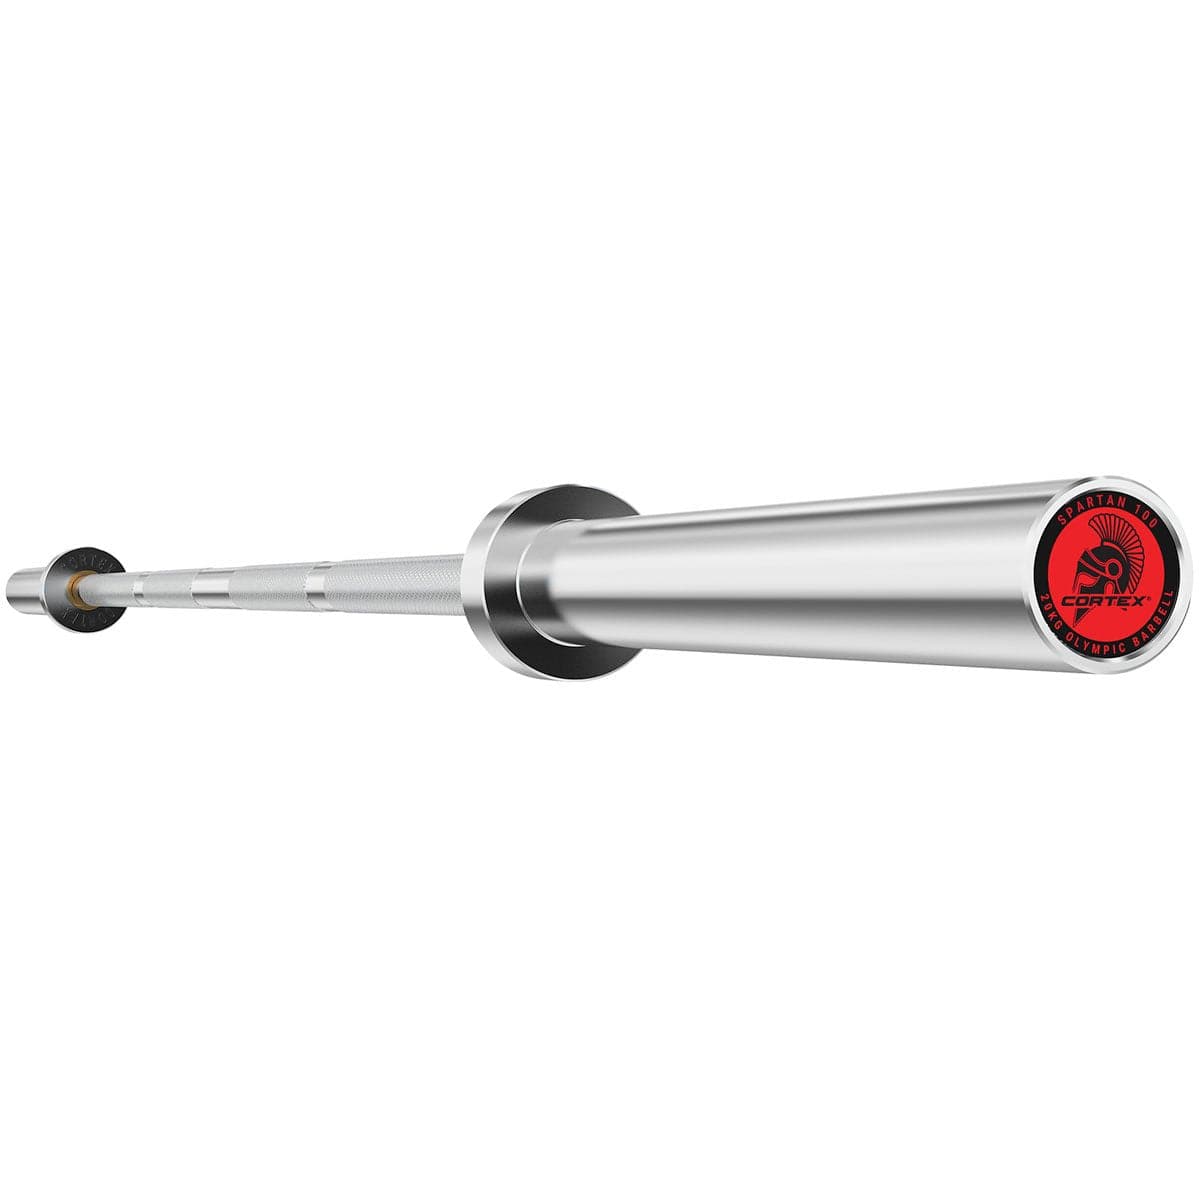 SPARTAN100 7FT 20KG OLYMPIC BARBELL (CHROME) WITH SPRING COLLARS